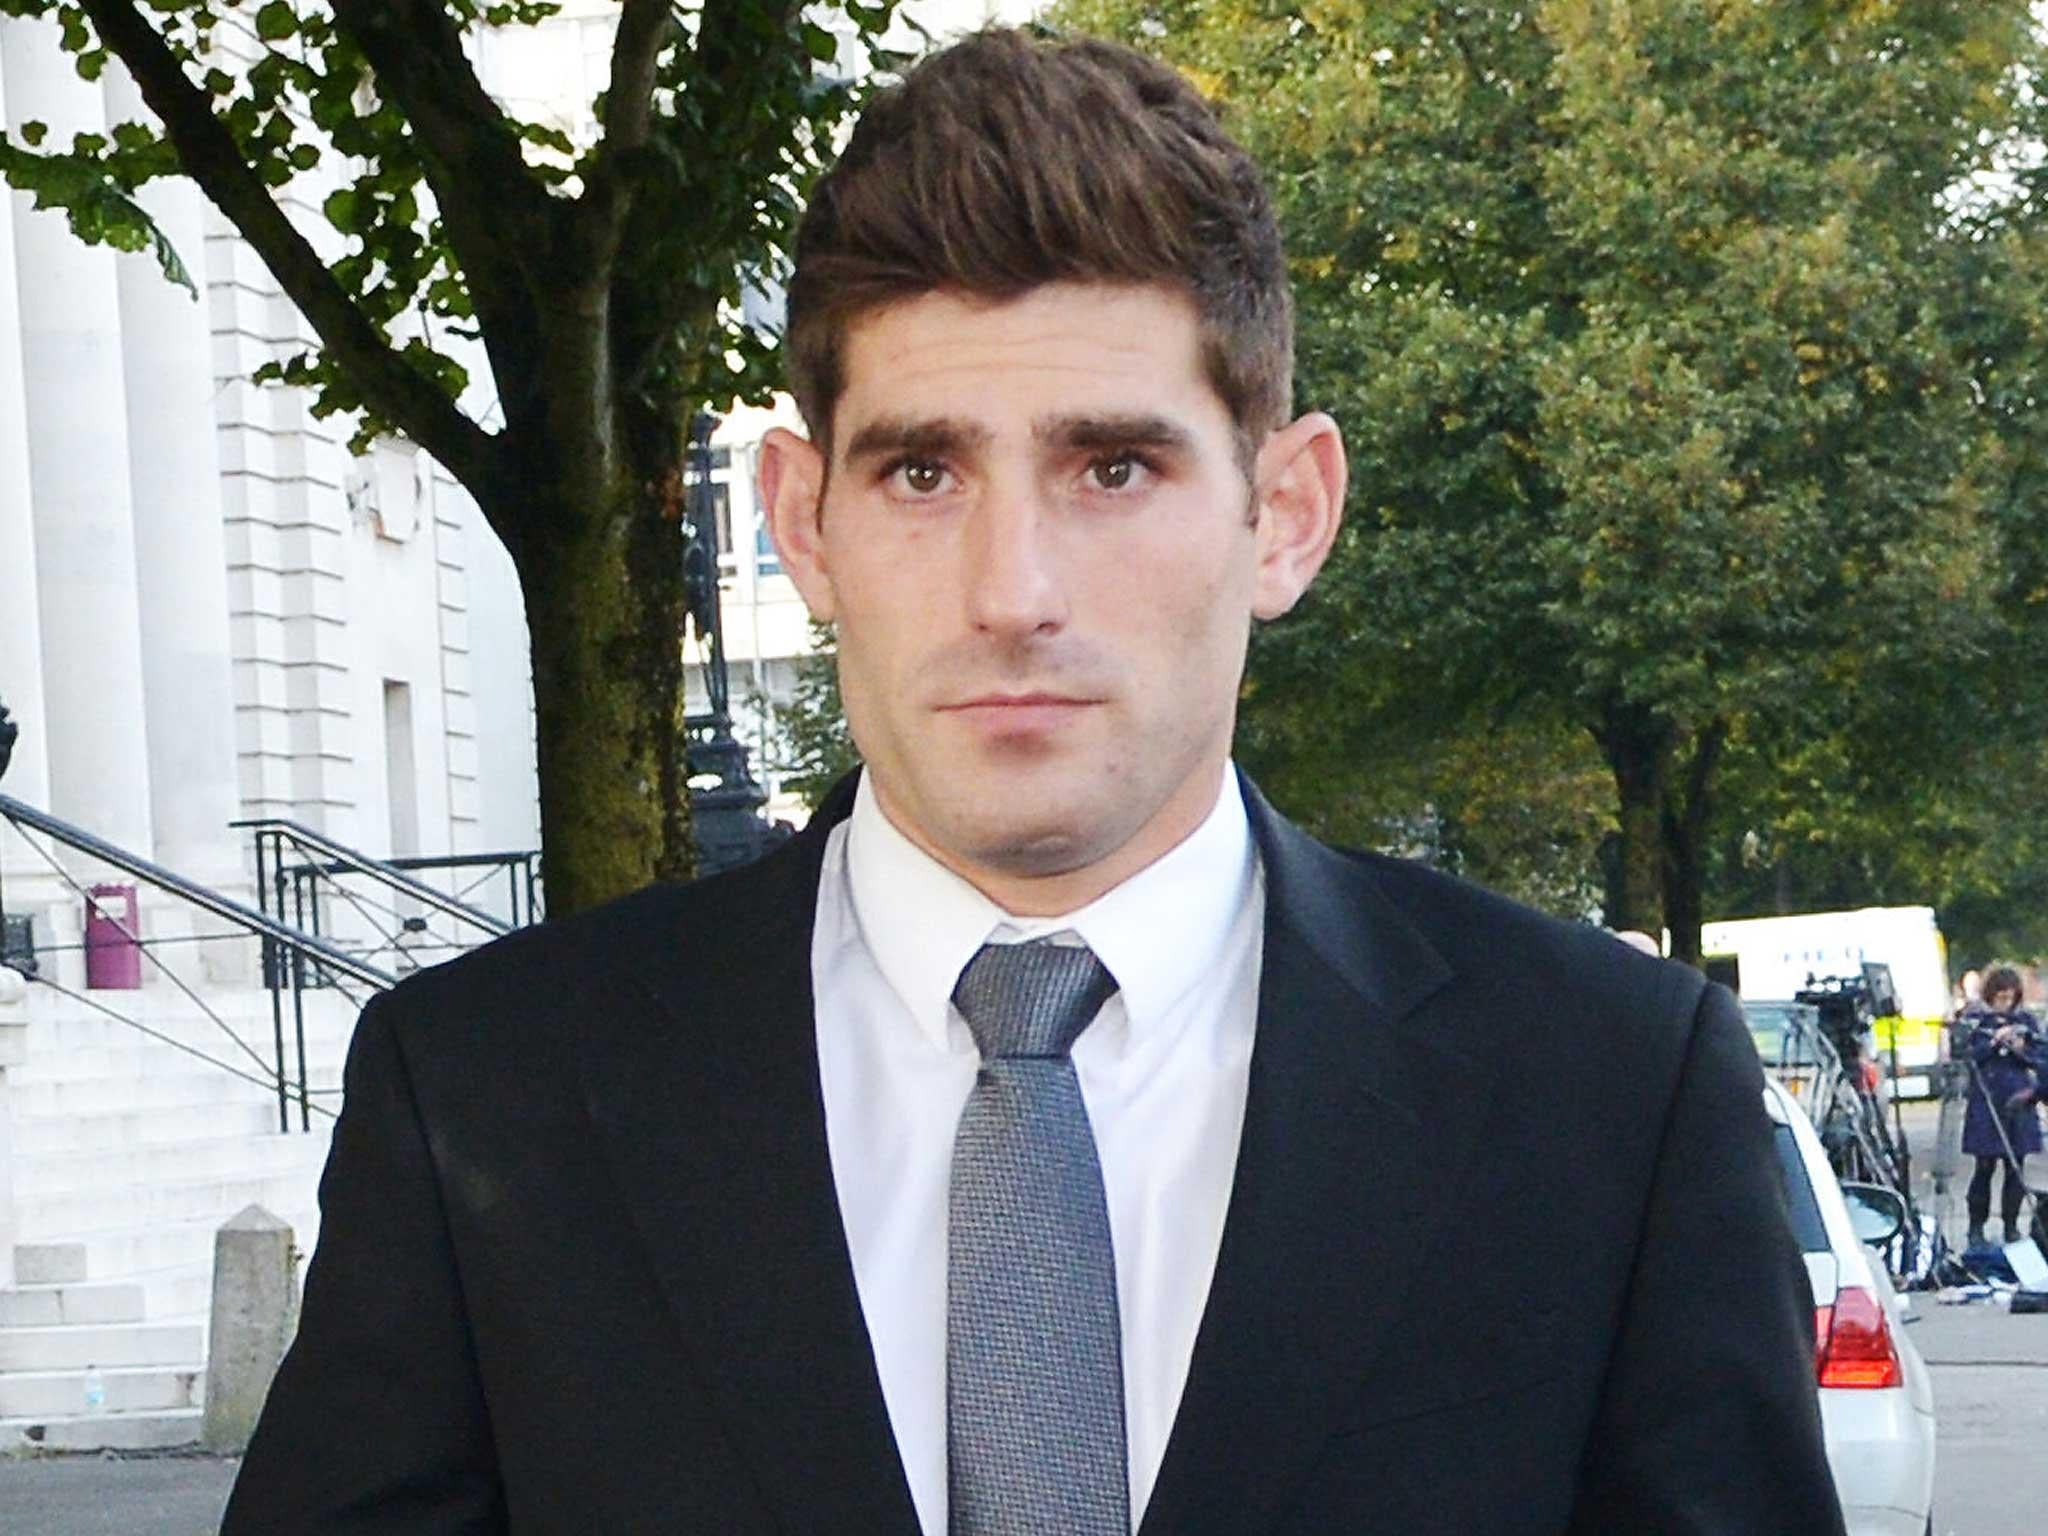 Footballer Ched Evans leaves Cardiff Crown Court, where he has been found not guilty of raping a teenager in a hotel in north Wales